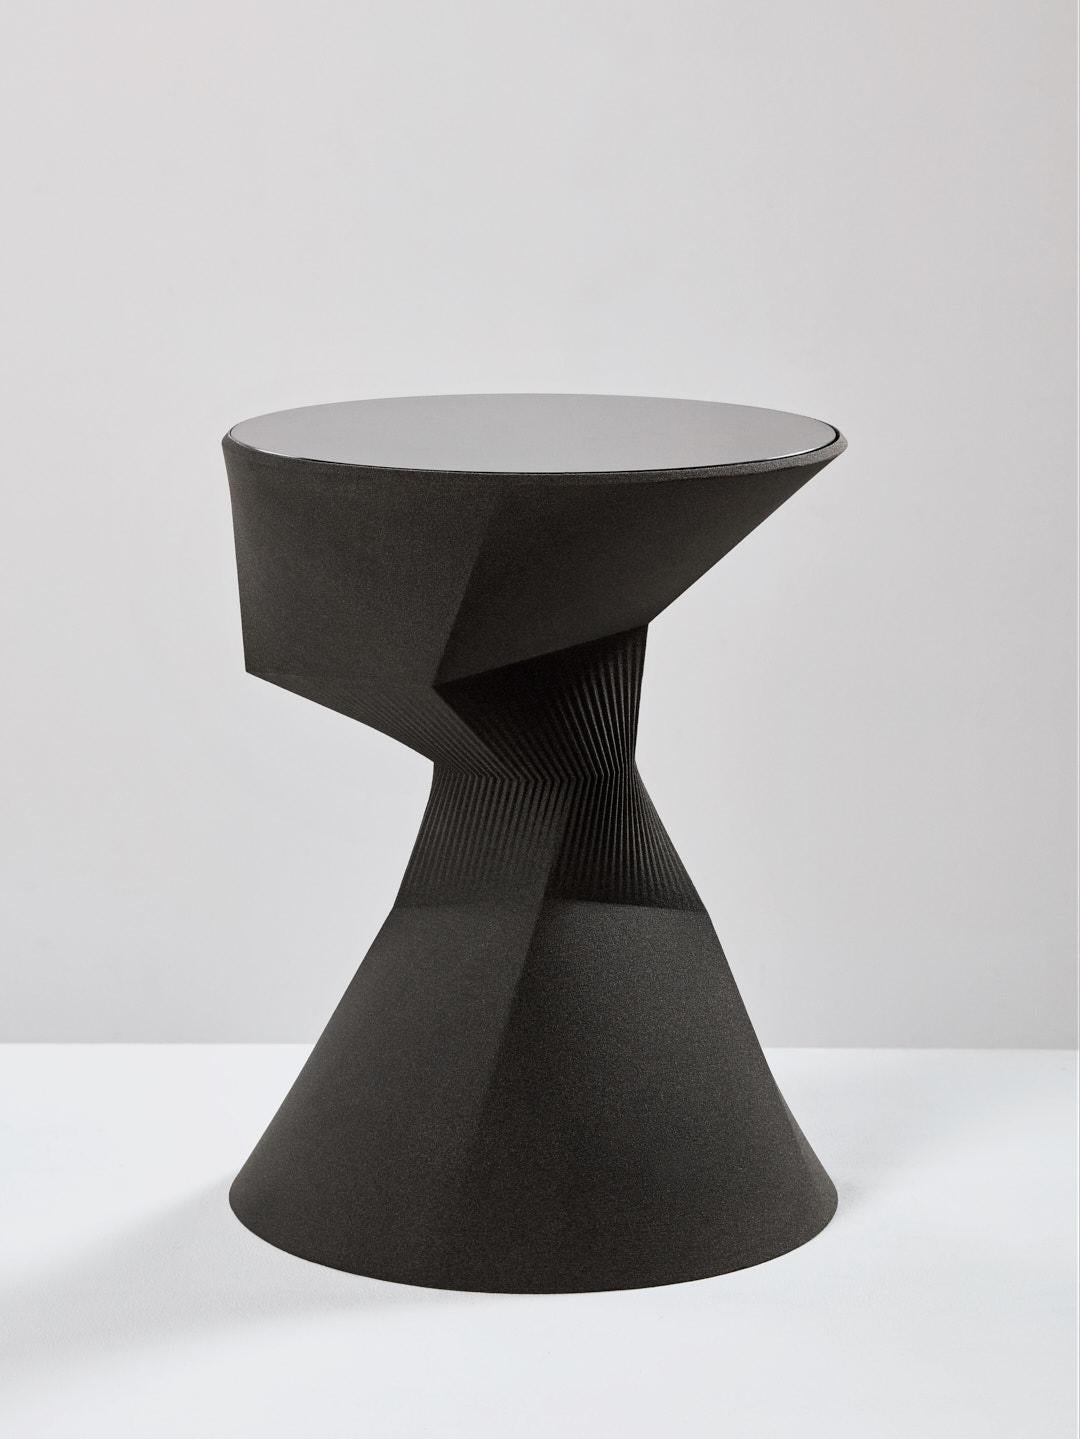 The pleat table high is part of the 'Sand in Motion' collection – a family of sculptural objects manufactured from 3D printed sand, using technology that was developed for the German automotive and aerospace industries. 

The subtle curves, in